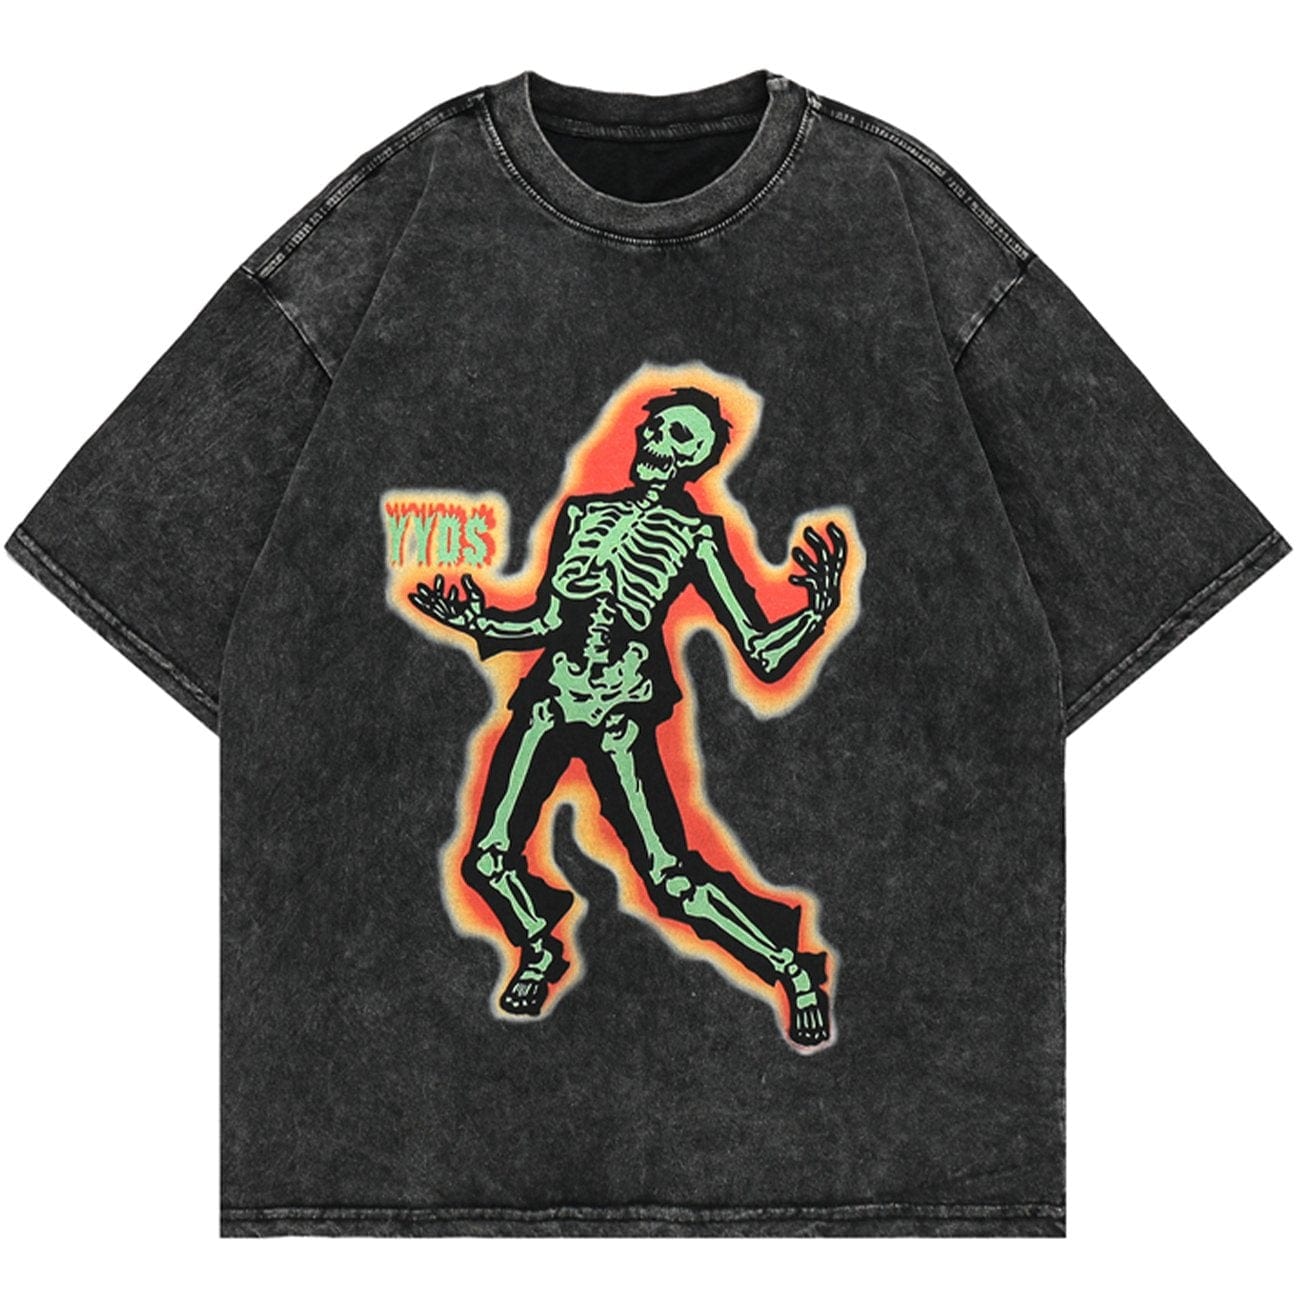 TO Electric Shock Skeleton Graphic Tee